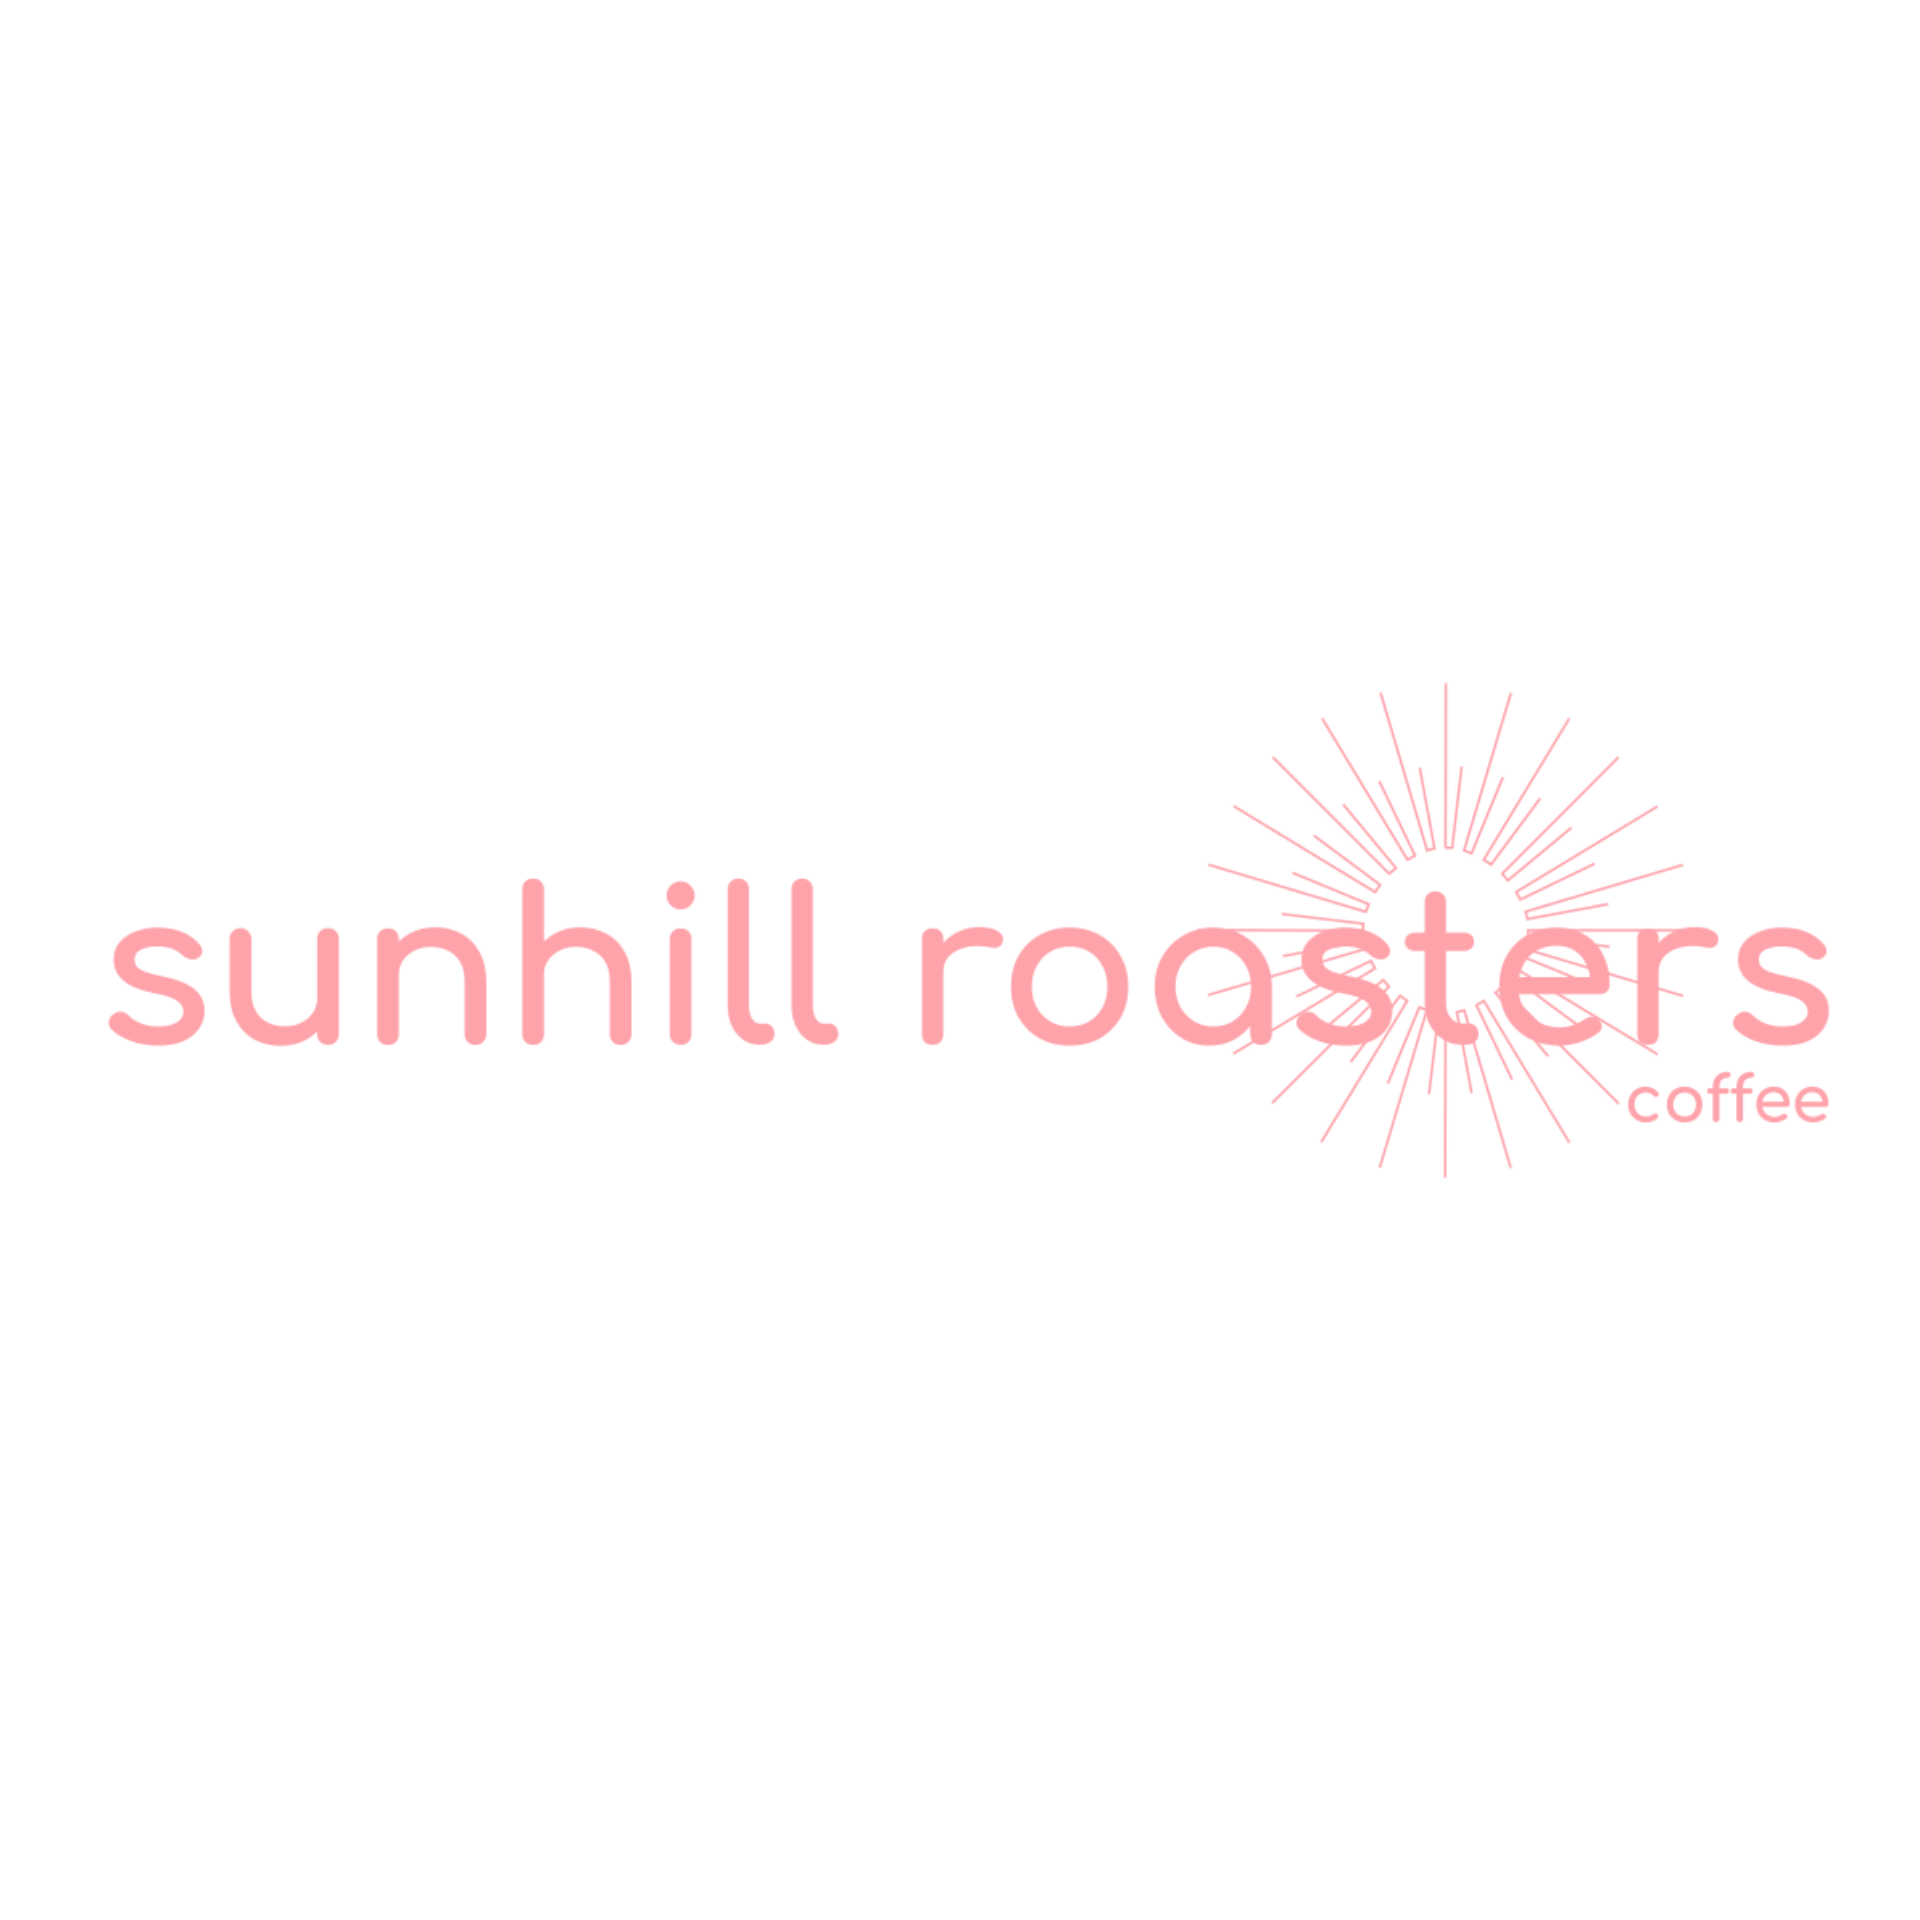 sunhill roasters logo.png